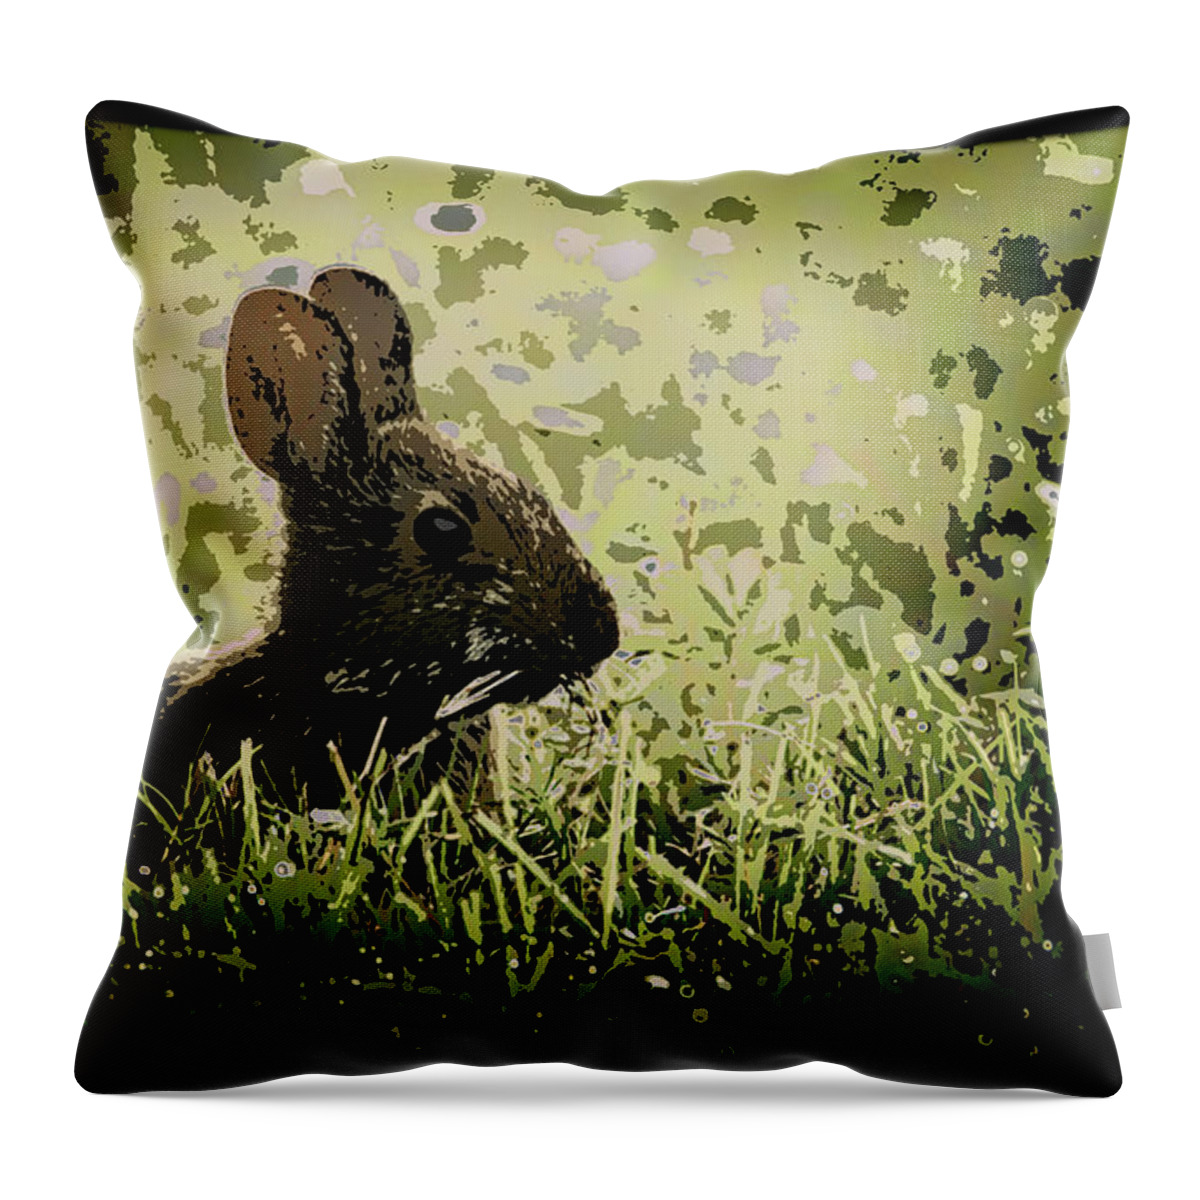 Rabbit Throw Pillow featuring the photograph Rabbit In Meadow by Richard Goldman